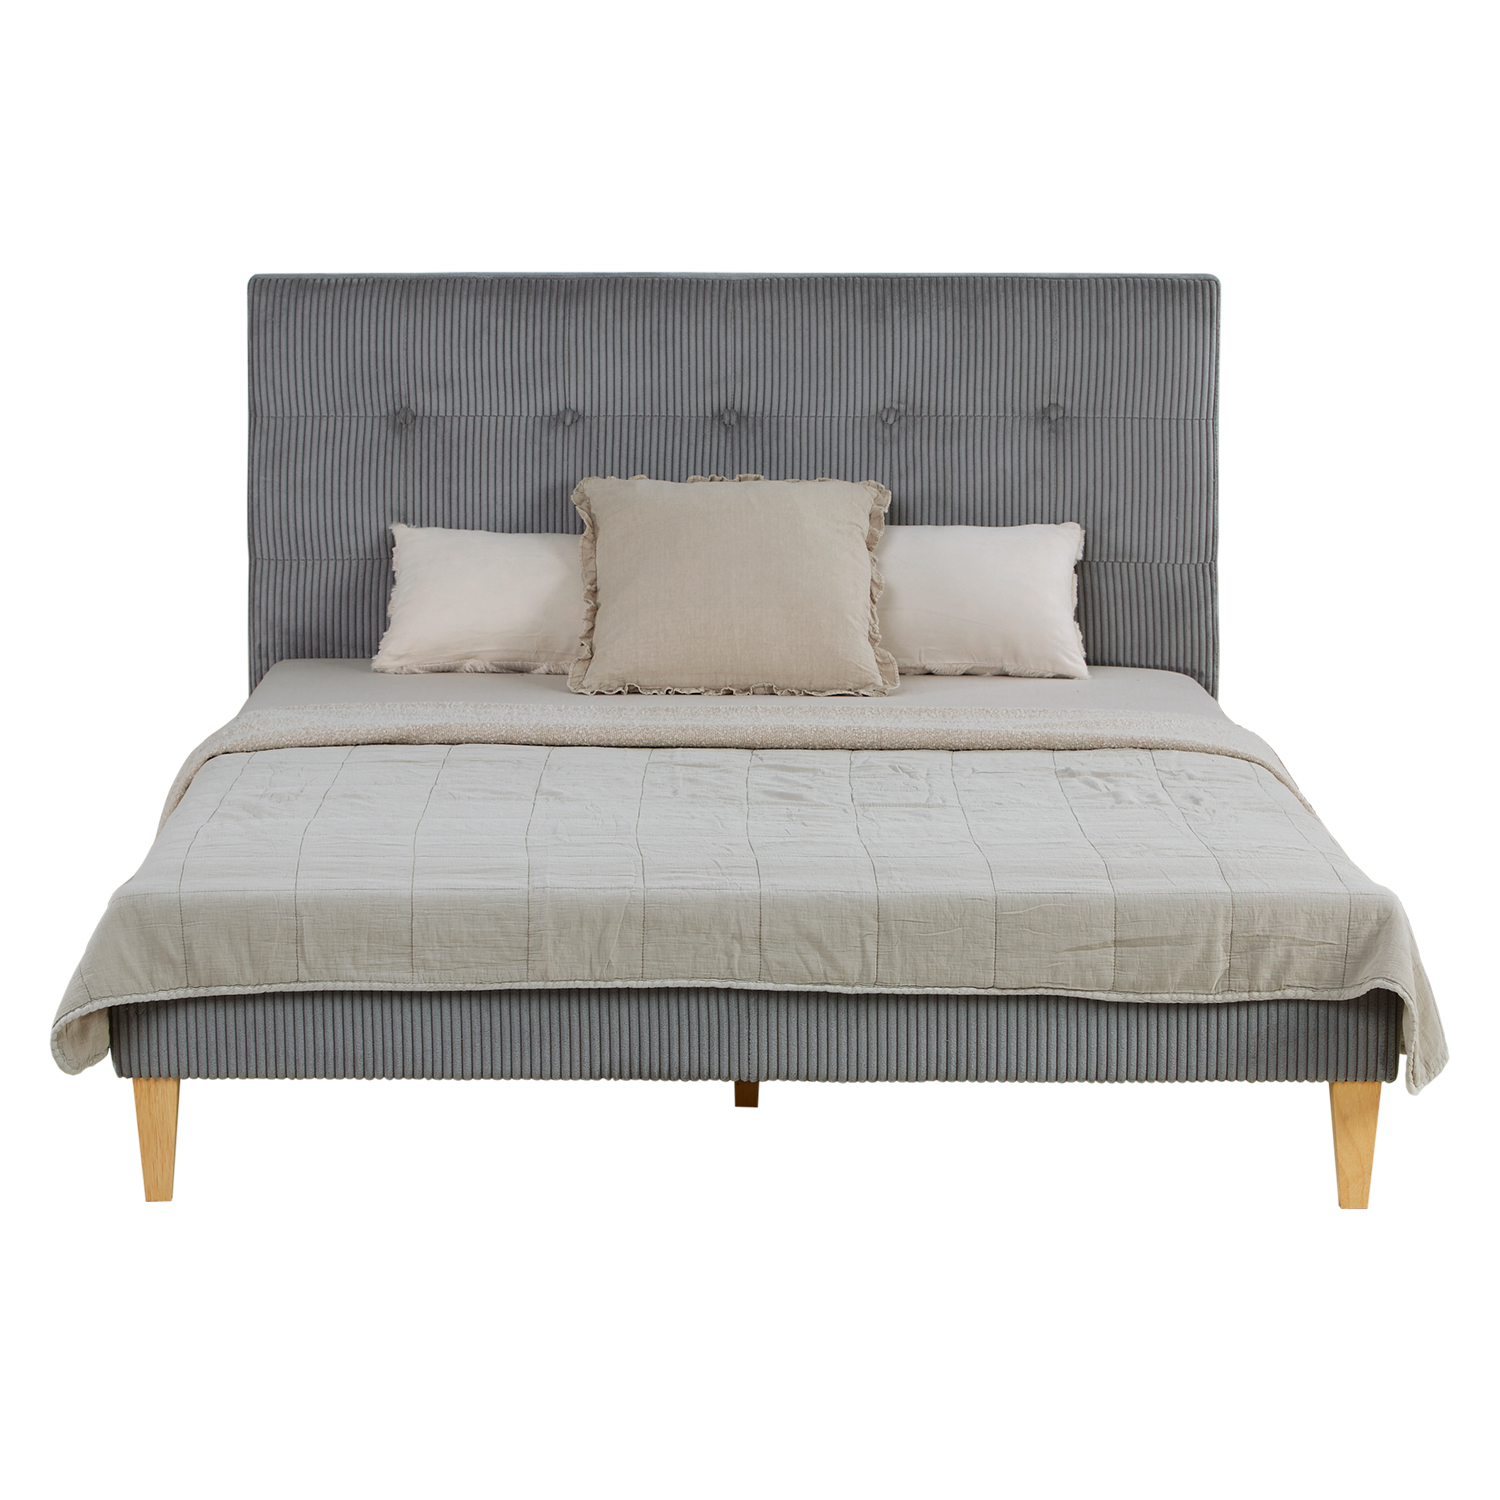 Small Double Bed 140x200 cm Grey Cord Upholstered Bed with Slatted Frame Fabric Bed Frame